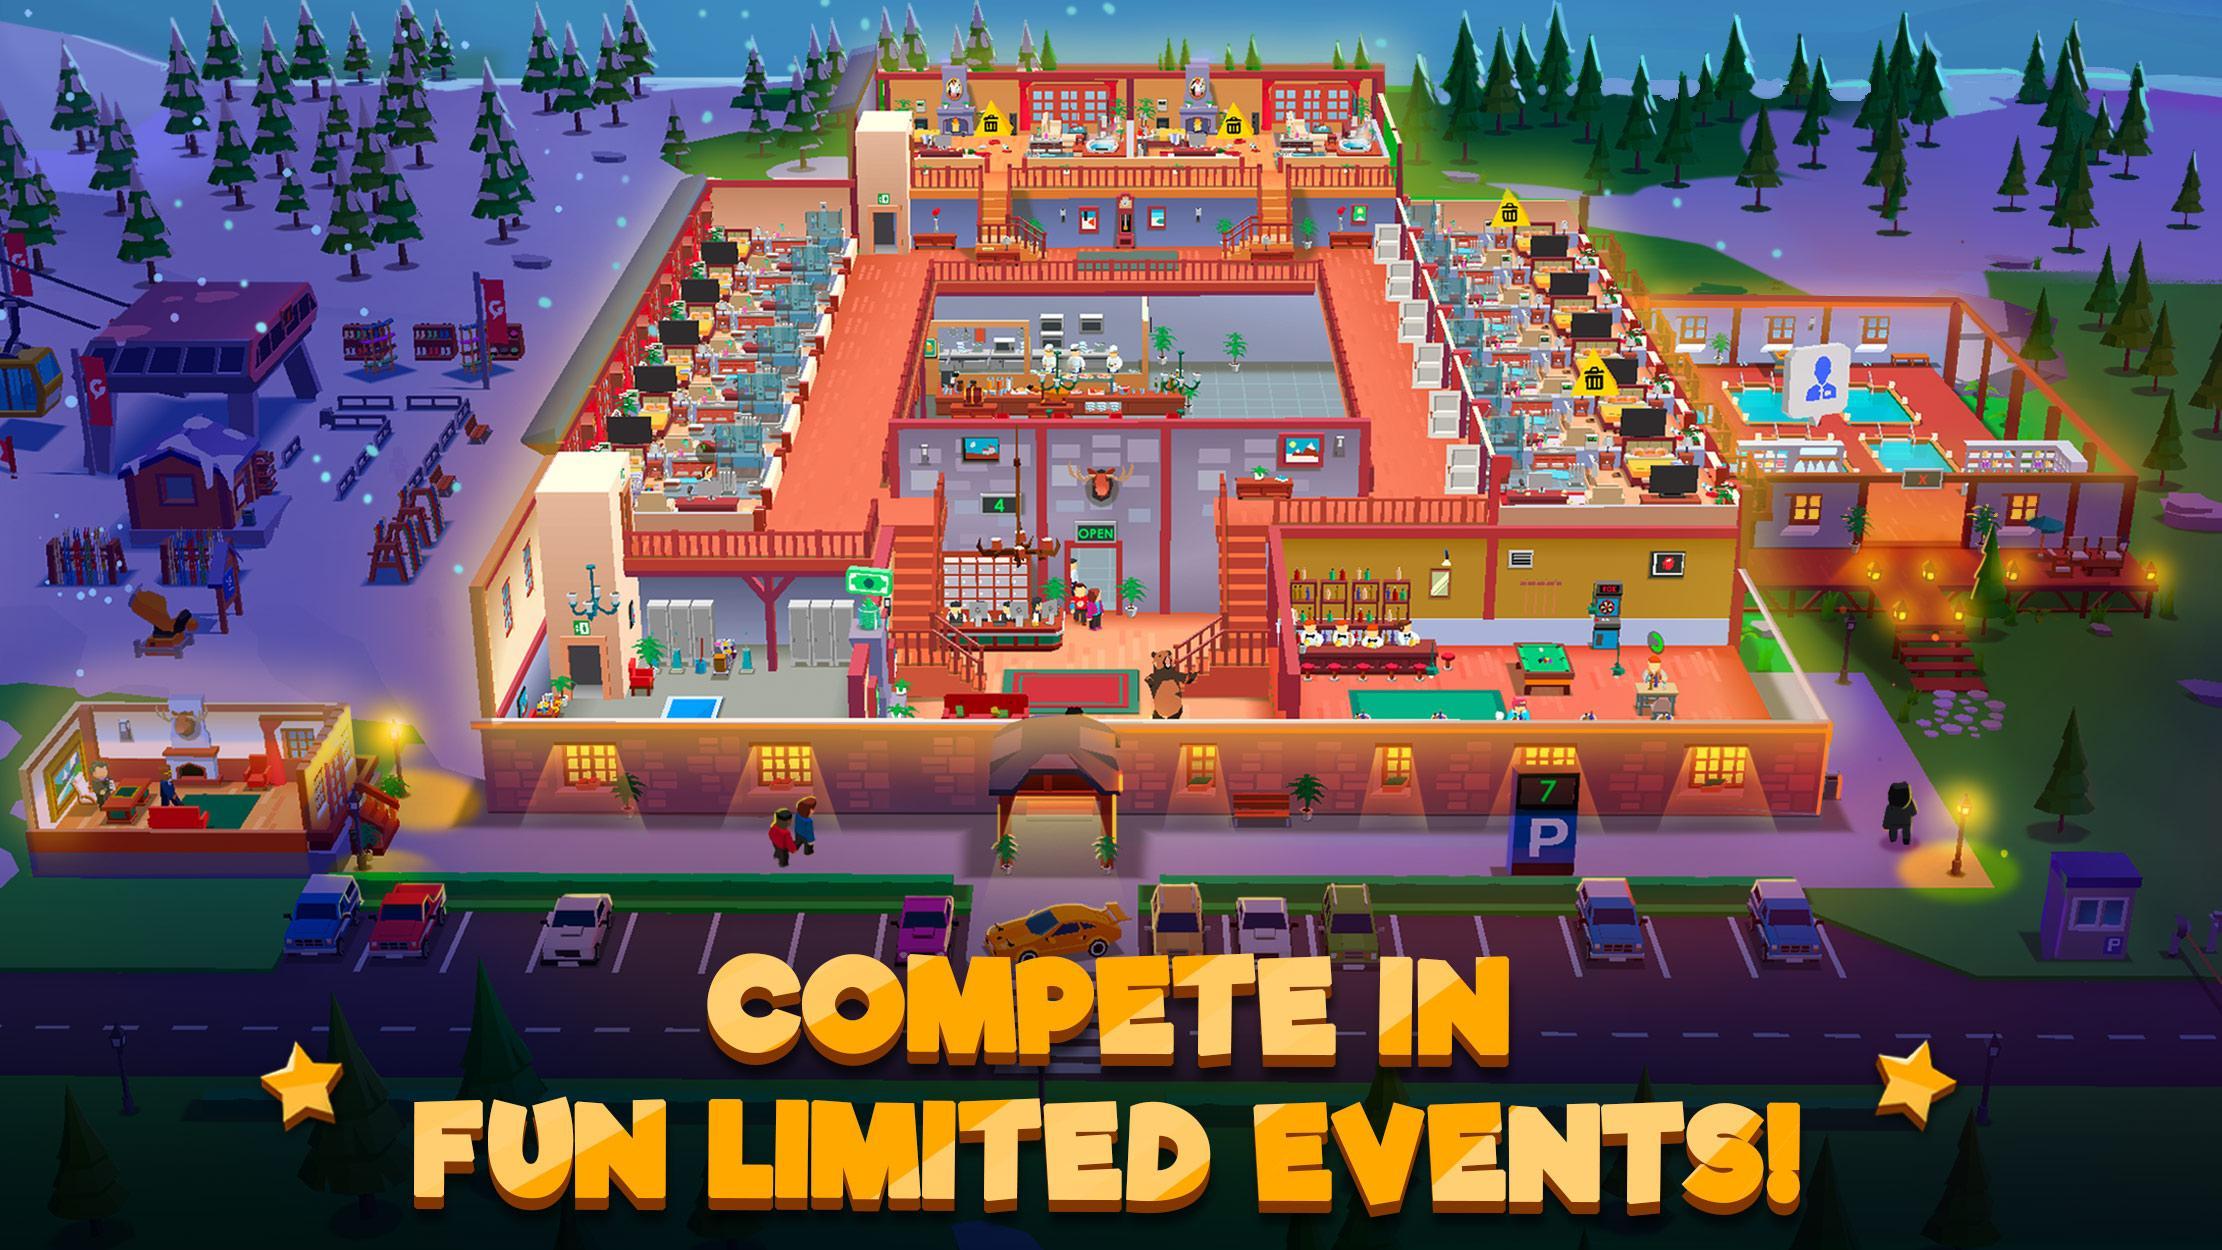 Mod games tycoon. Hotel Empire Tycoon курорт Санты. Игра Hotel Tycoon. Hotel Empire Tycoon отели. Hotel Empire Tycoon андроид.